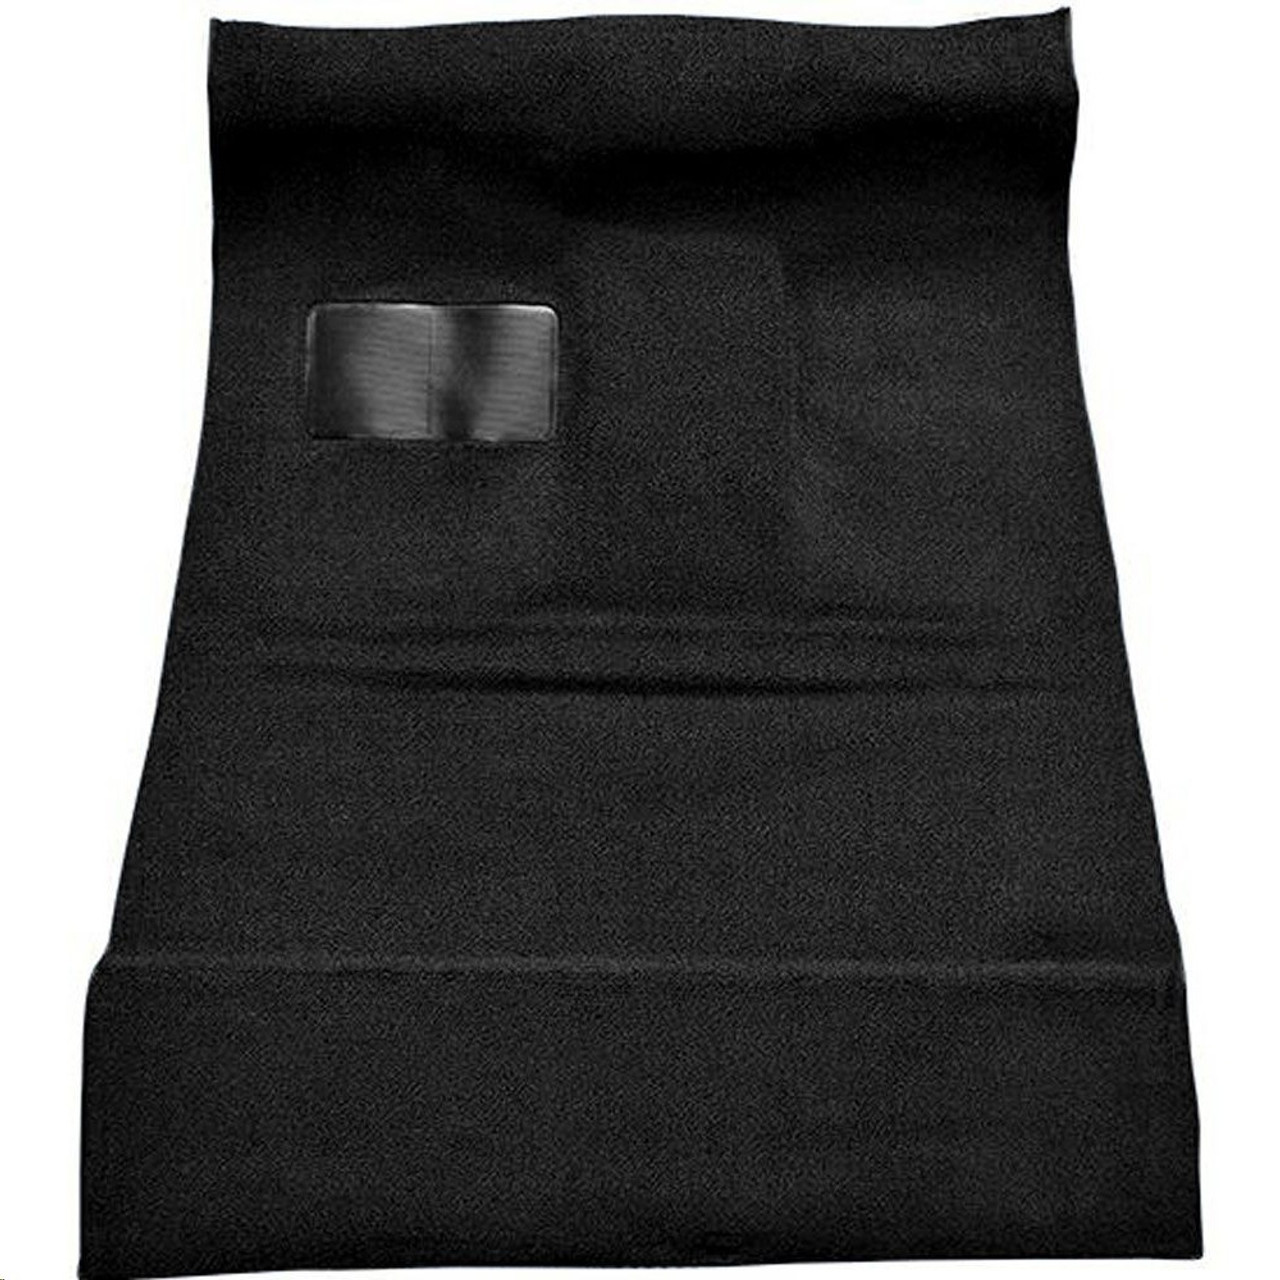 1948-52 Ford Truck Low Tunnel Molded Loop Carpet, Black, ea.